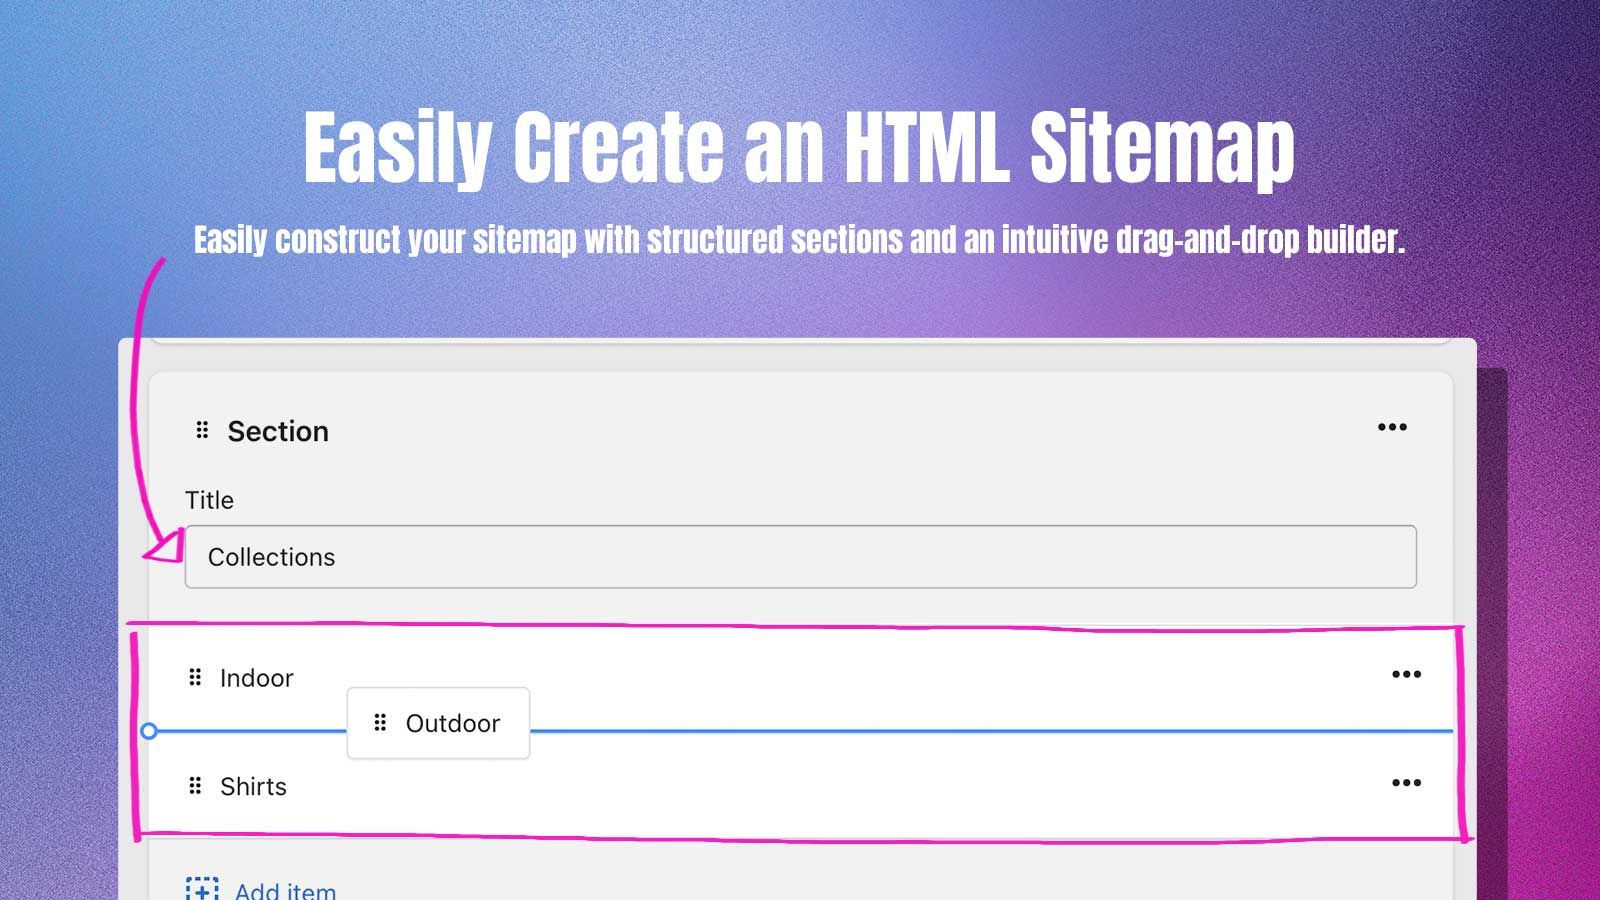 html sitemap drag-and-drop builder interface